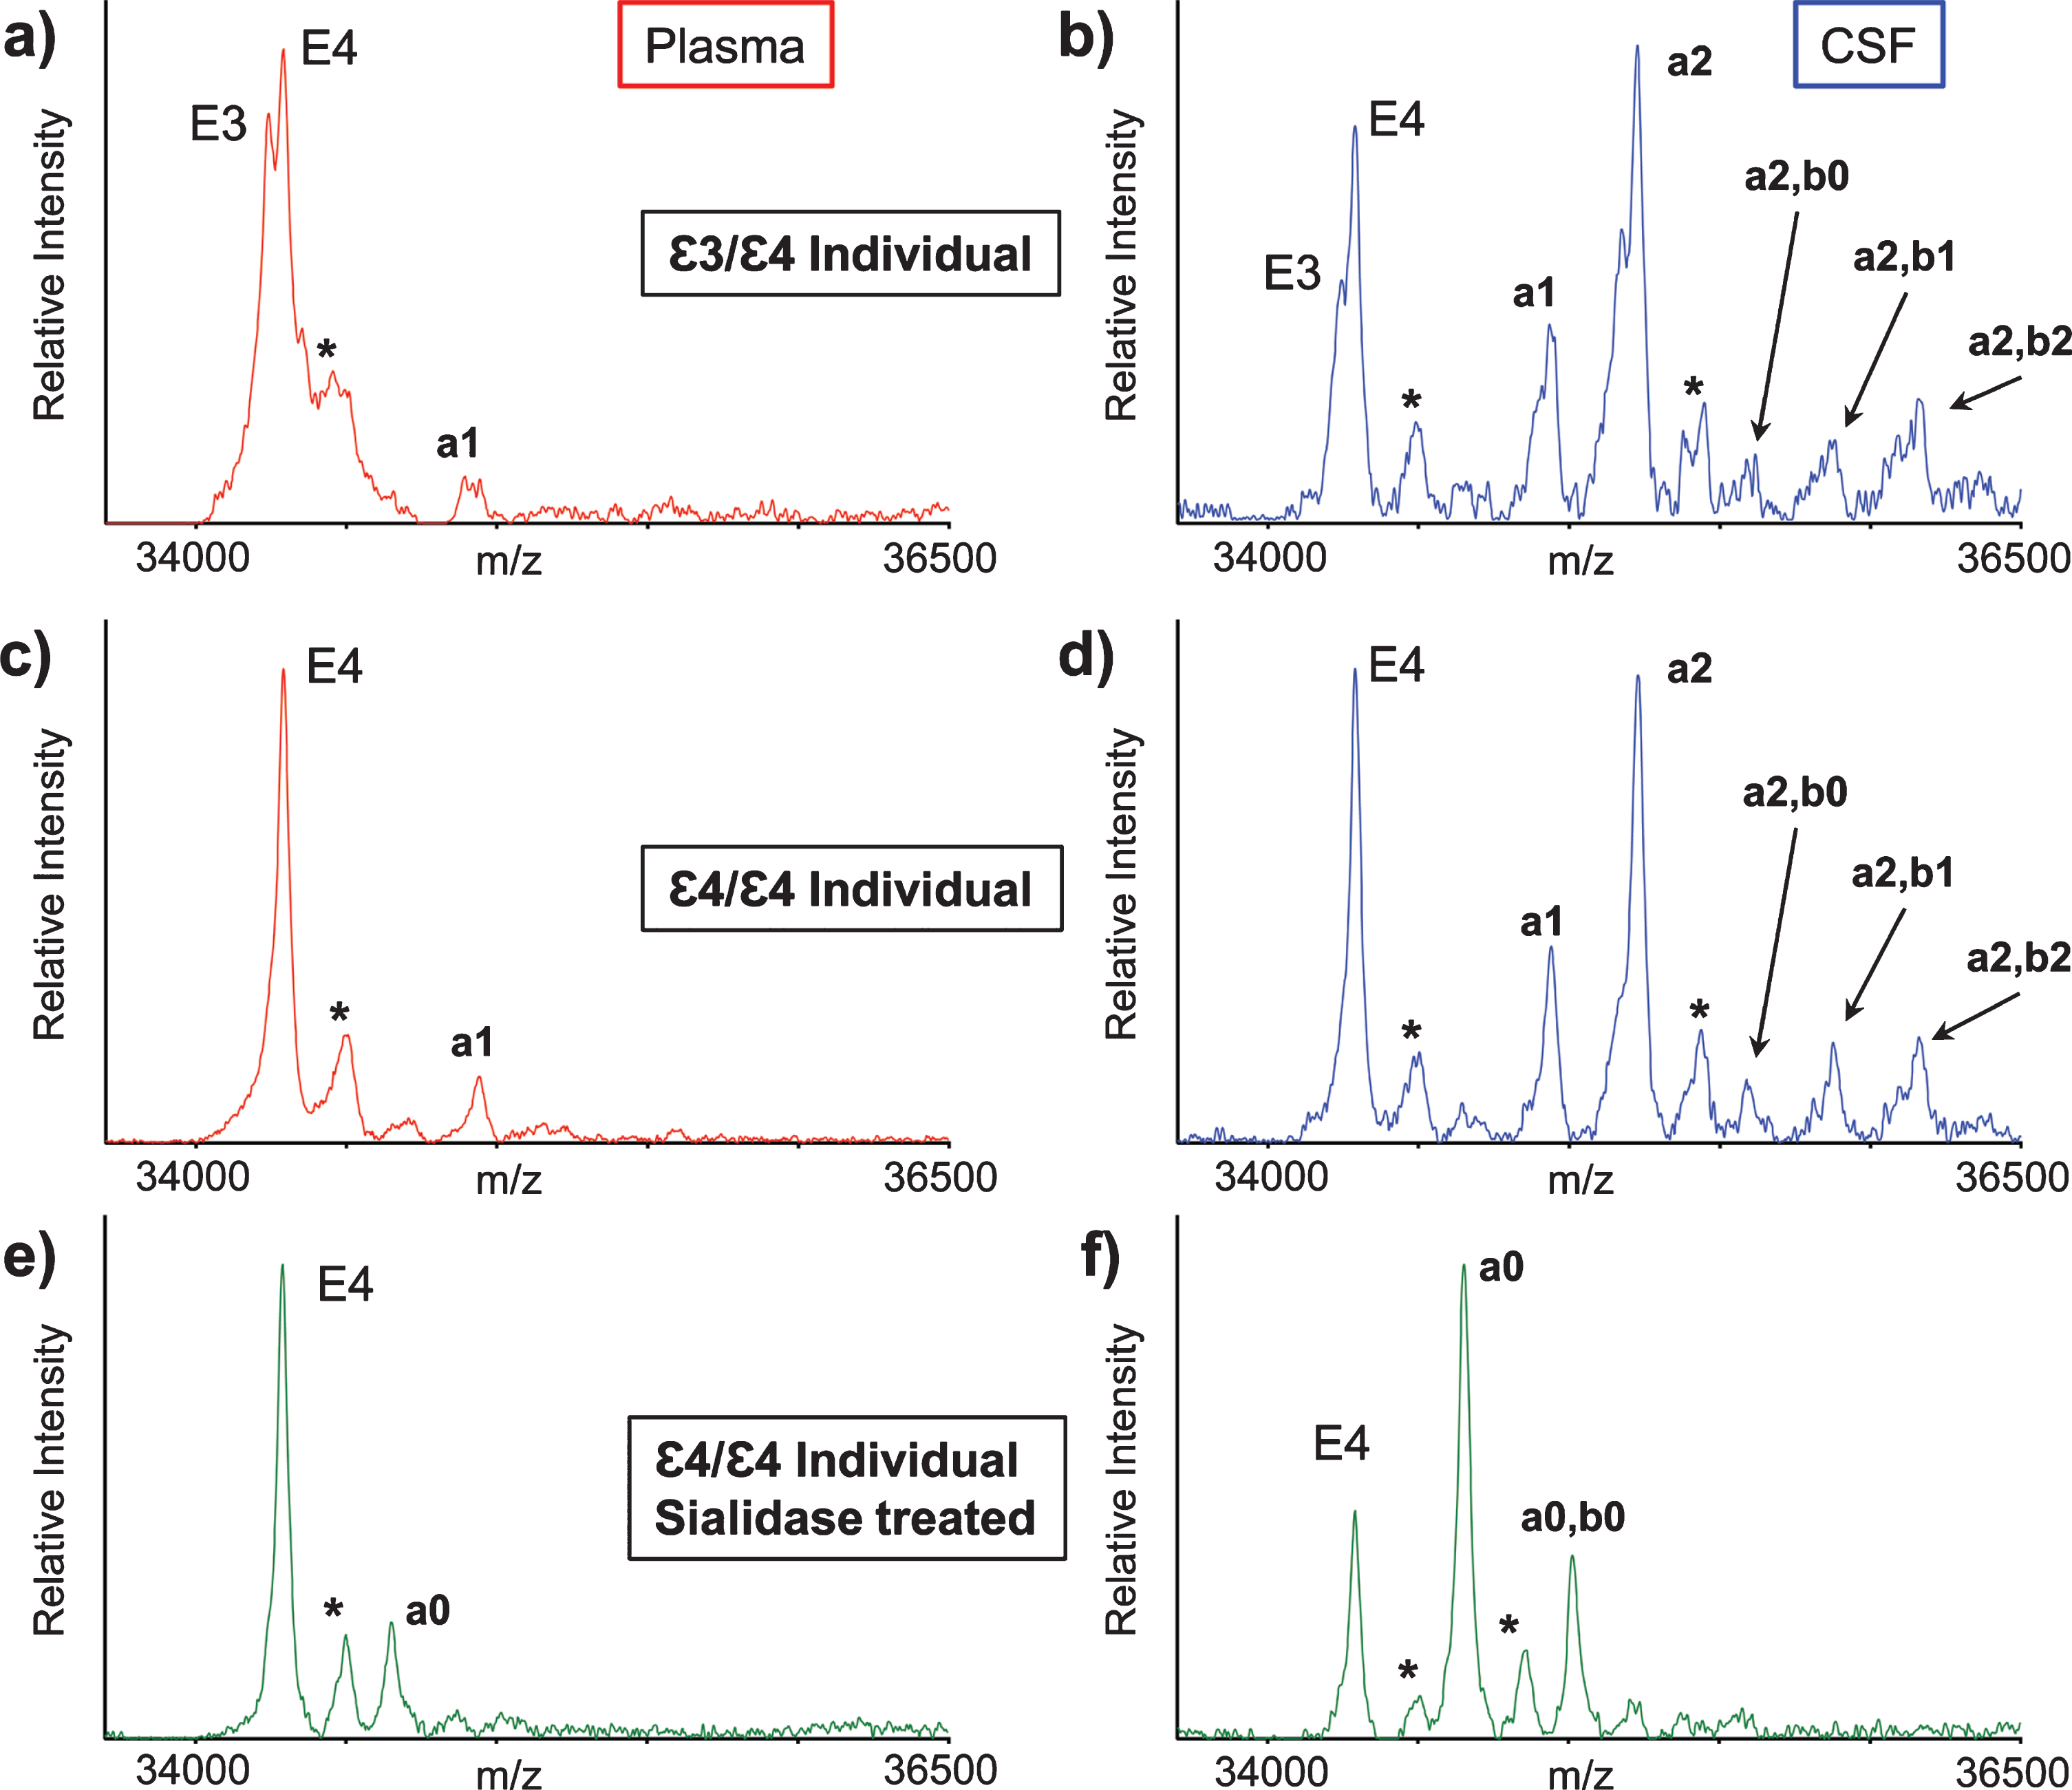 Mass spectra resulting from the analysis of the matched plasma and CSF from a heterozygous ɛ3/ɛ4 individual (a, b) and a homozygous ɛ4/ɛ4 individual (c, d). Mass spectra after sialidase treatment of plasma and CSF samples from the ɛ4/ɛ4 individual (e, f). Matrix adduct peaks are labeled with *. For the glycan peak labeling, structure, and predicted masses, see Table 1.